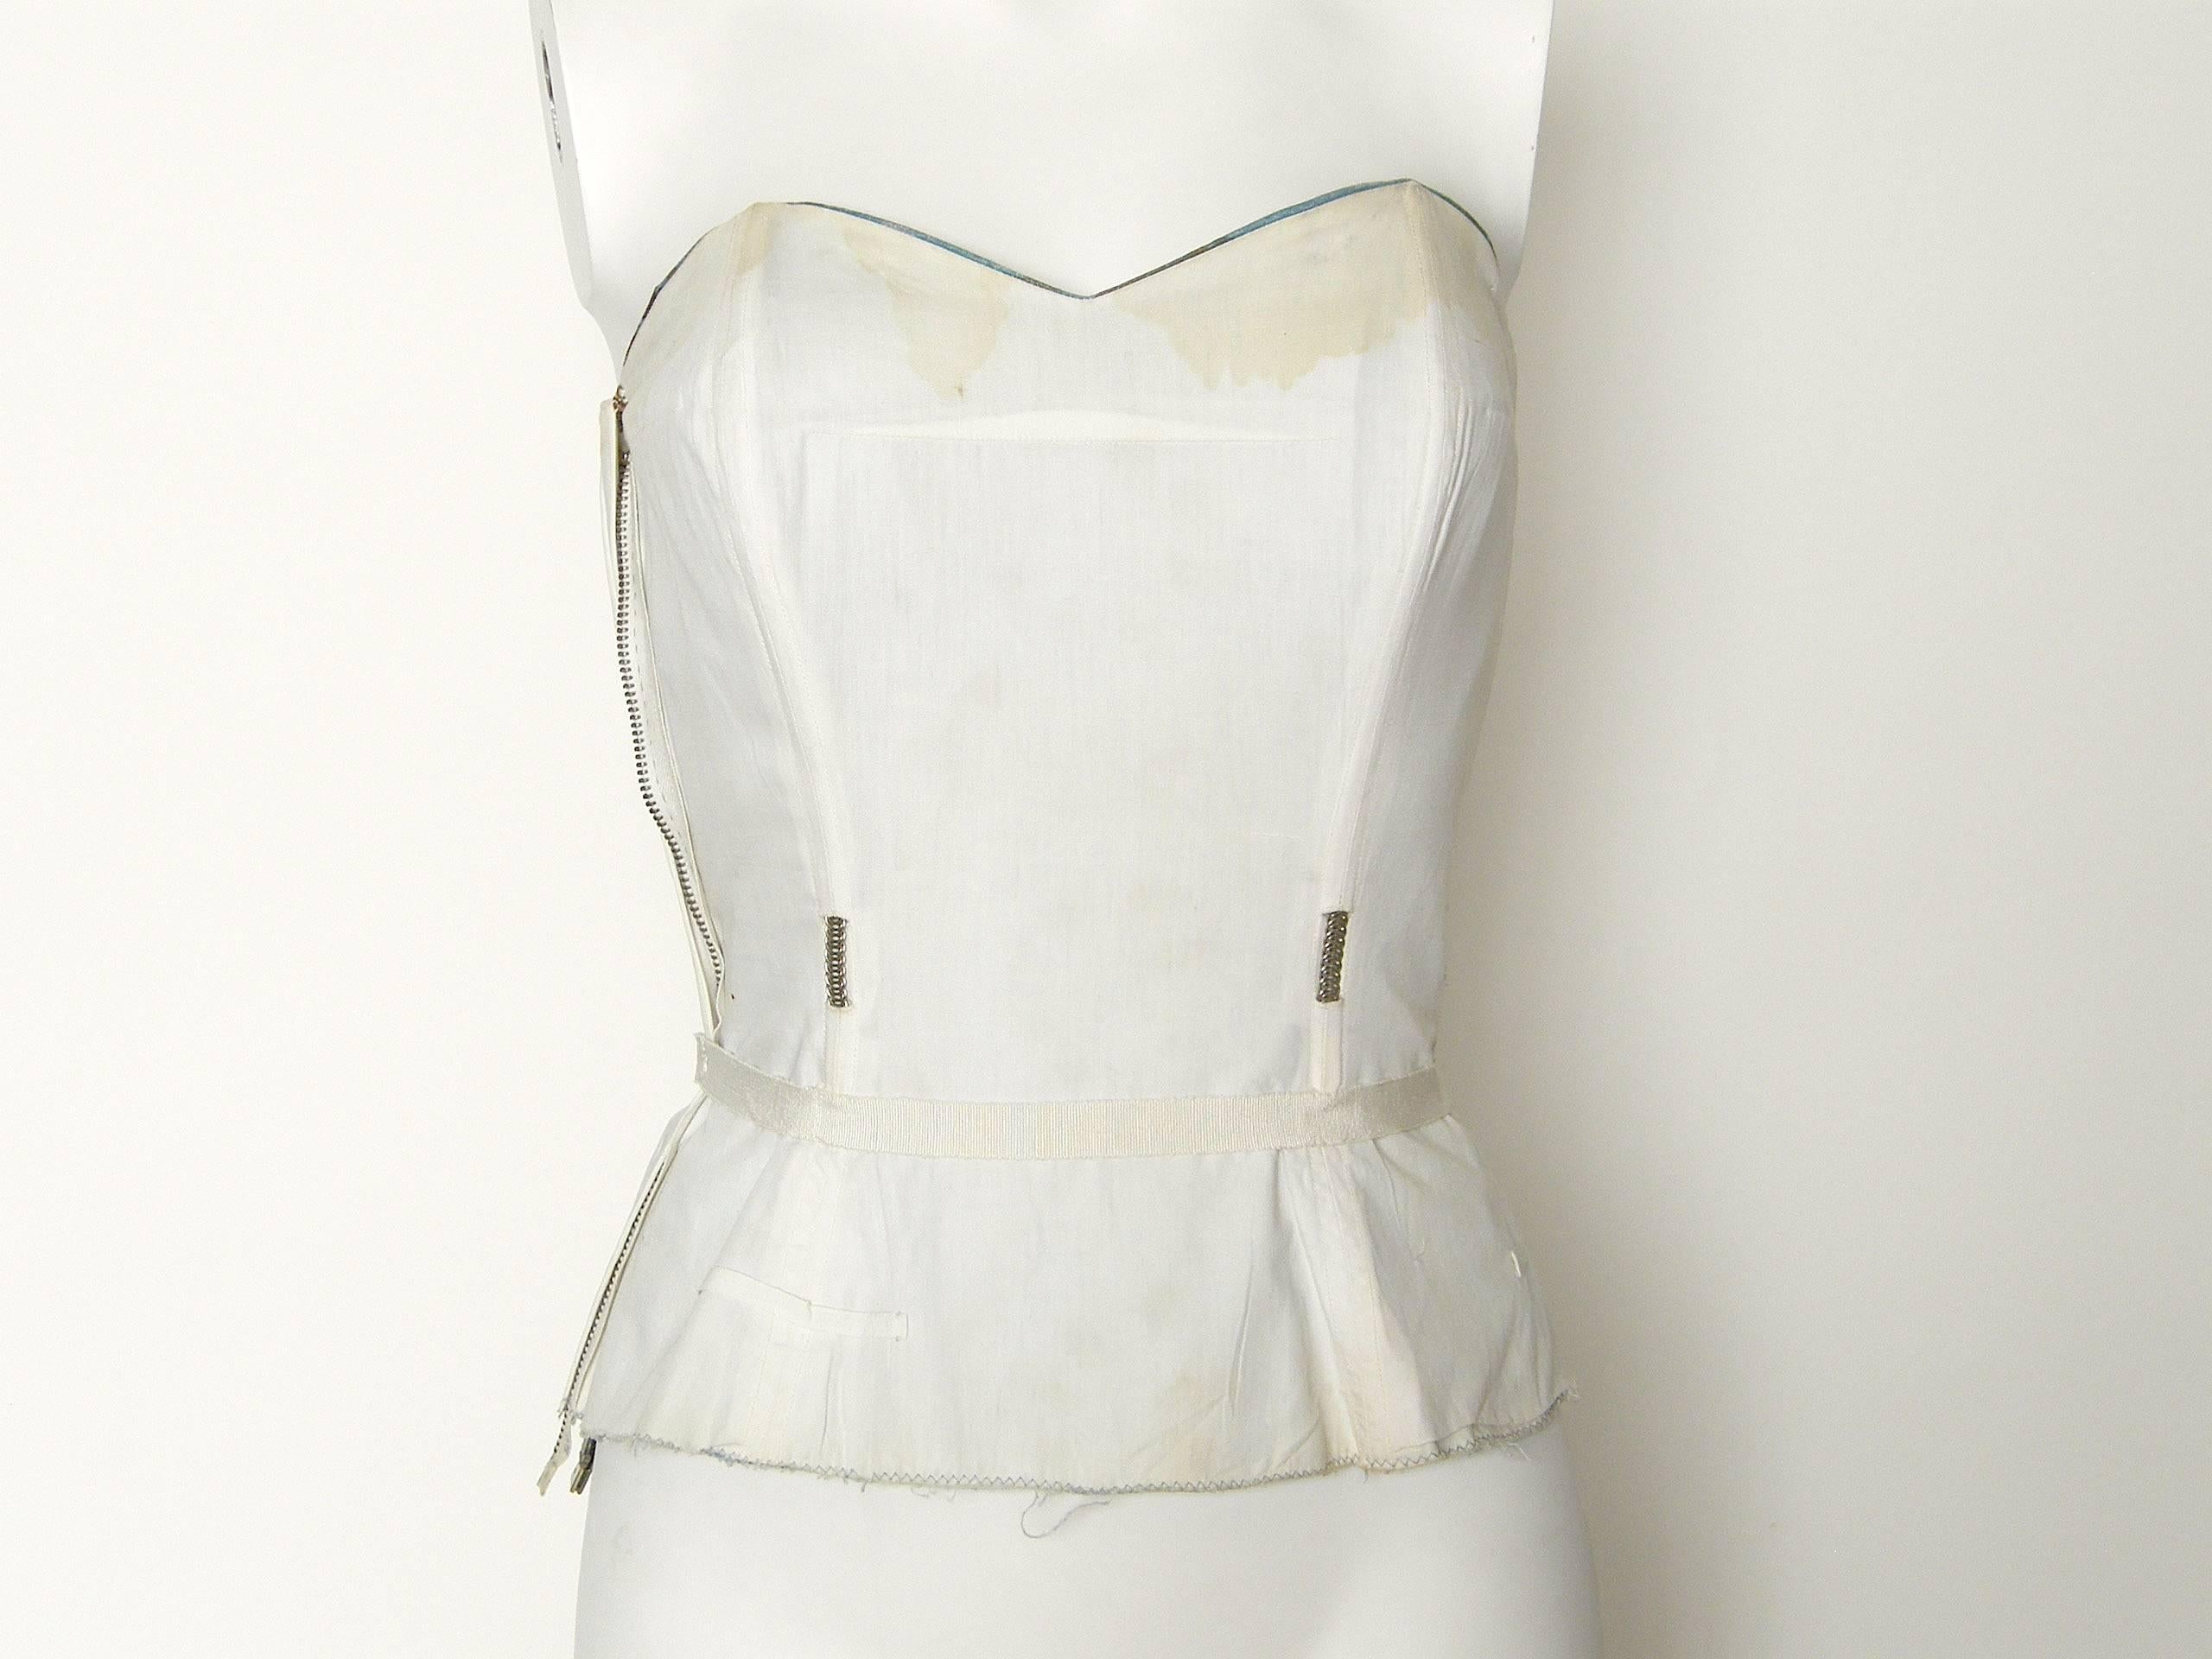 Early Emilio Pucci Strapless Bustier Sun Top Hand Painted Cotton 1